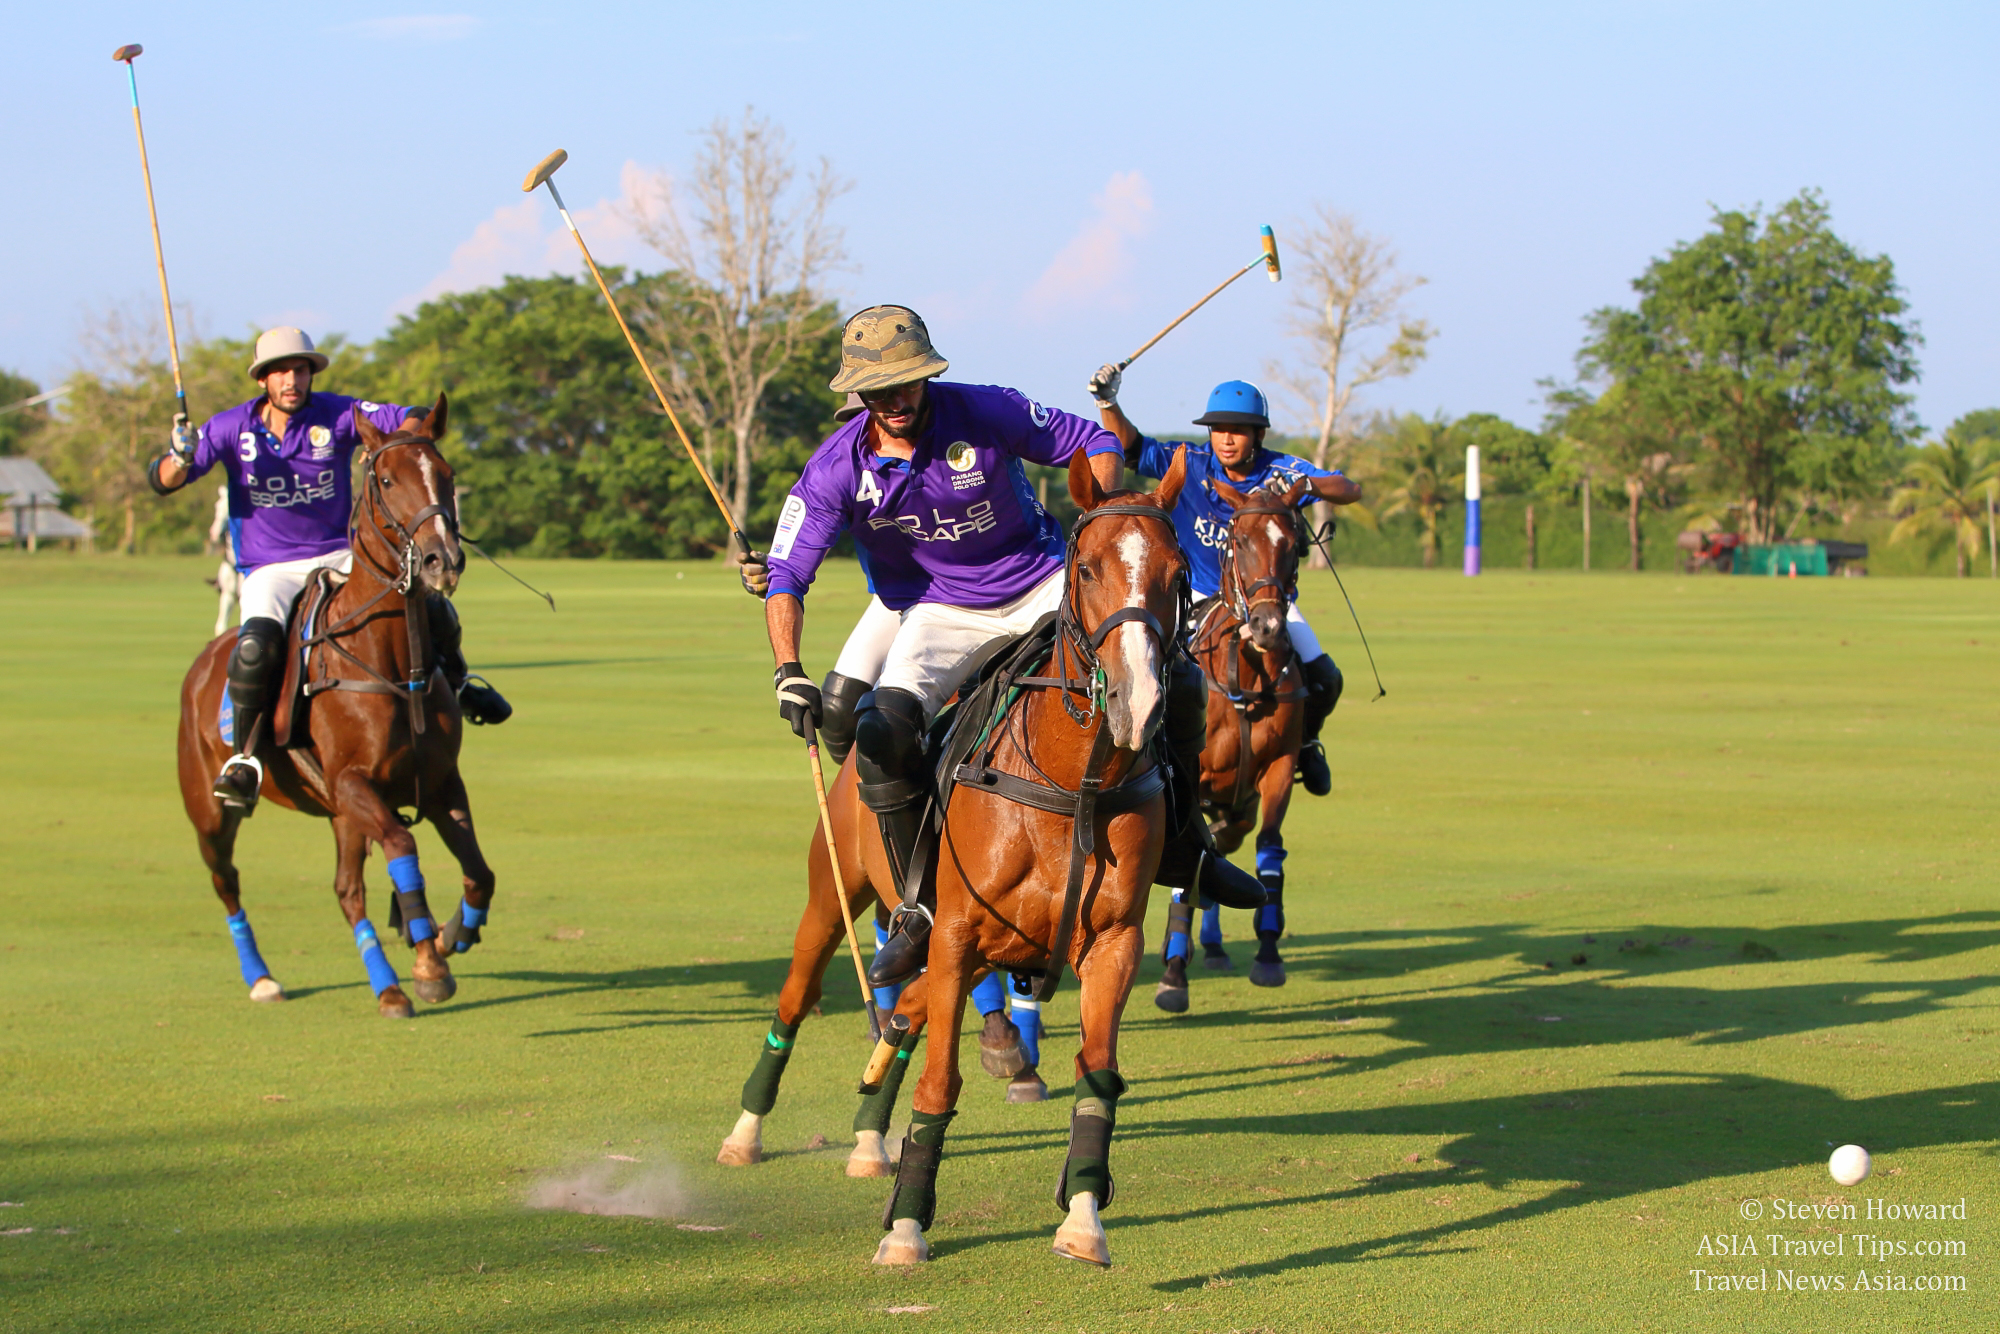 Pictures from 137 Pillars Polo Puissance Cup and James Ashton Trophy 2018 at Polo Escape in Pattaya, Thailand.